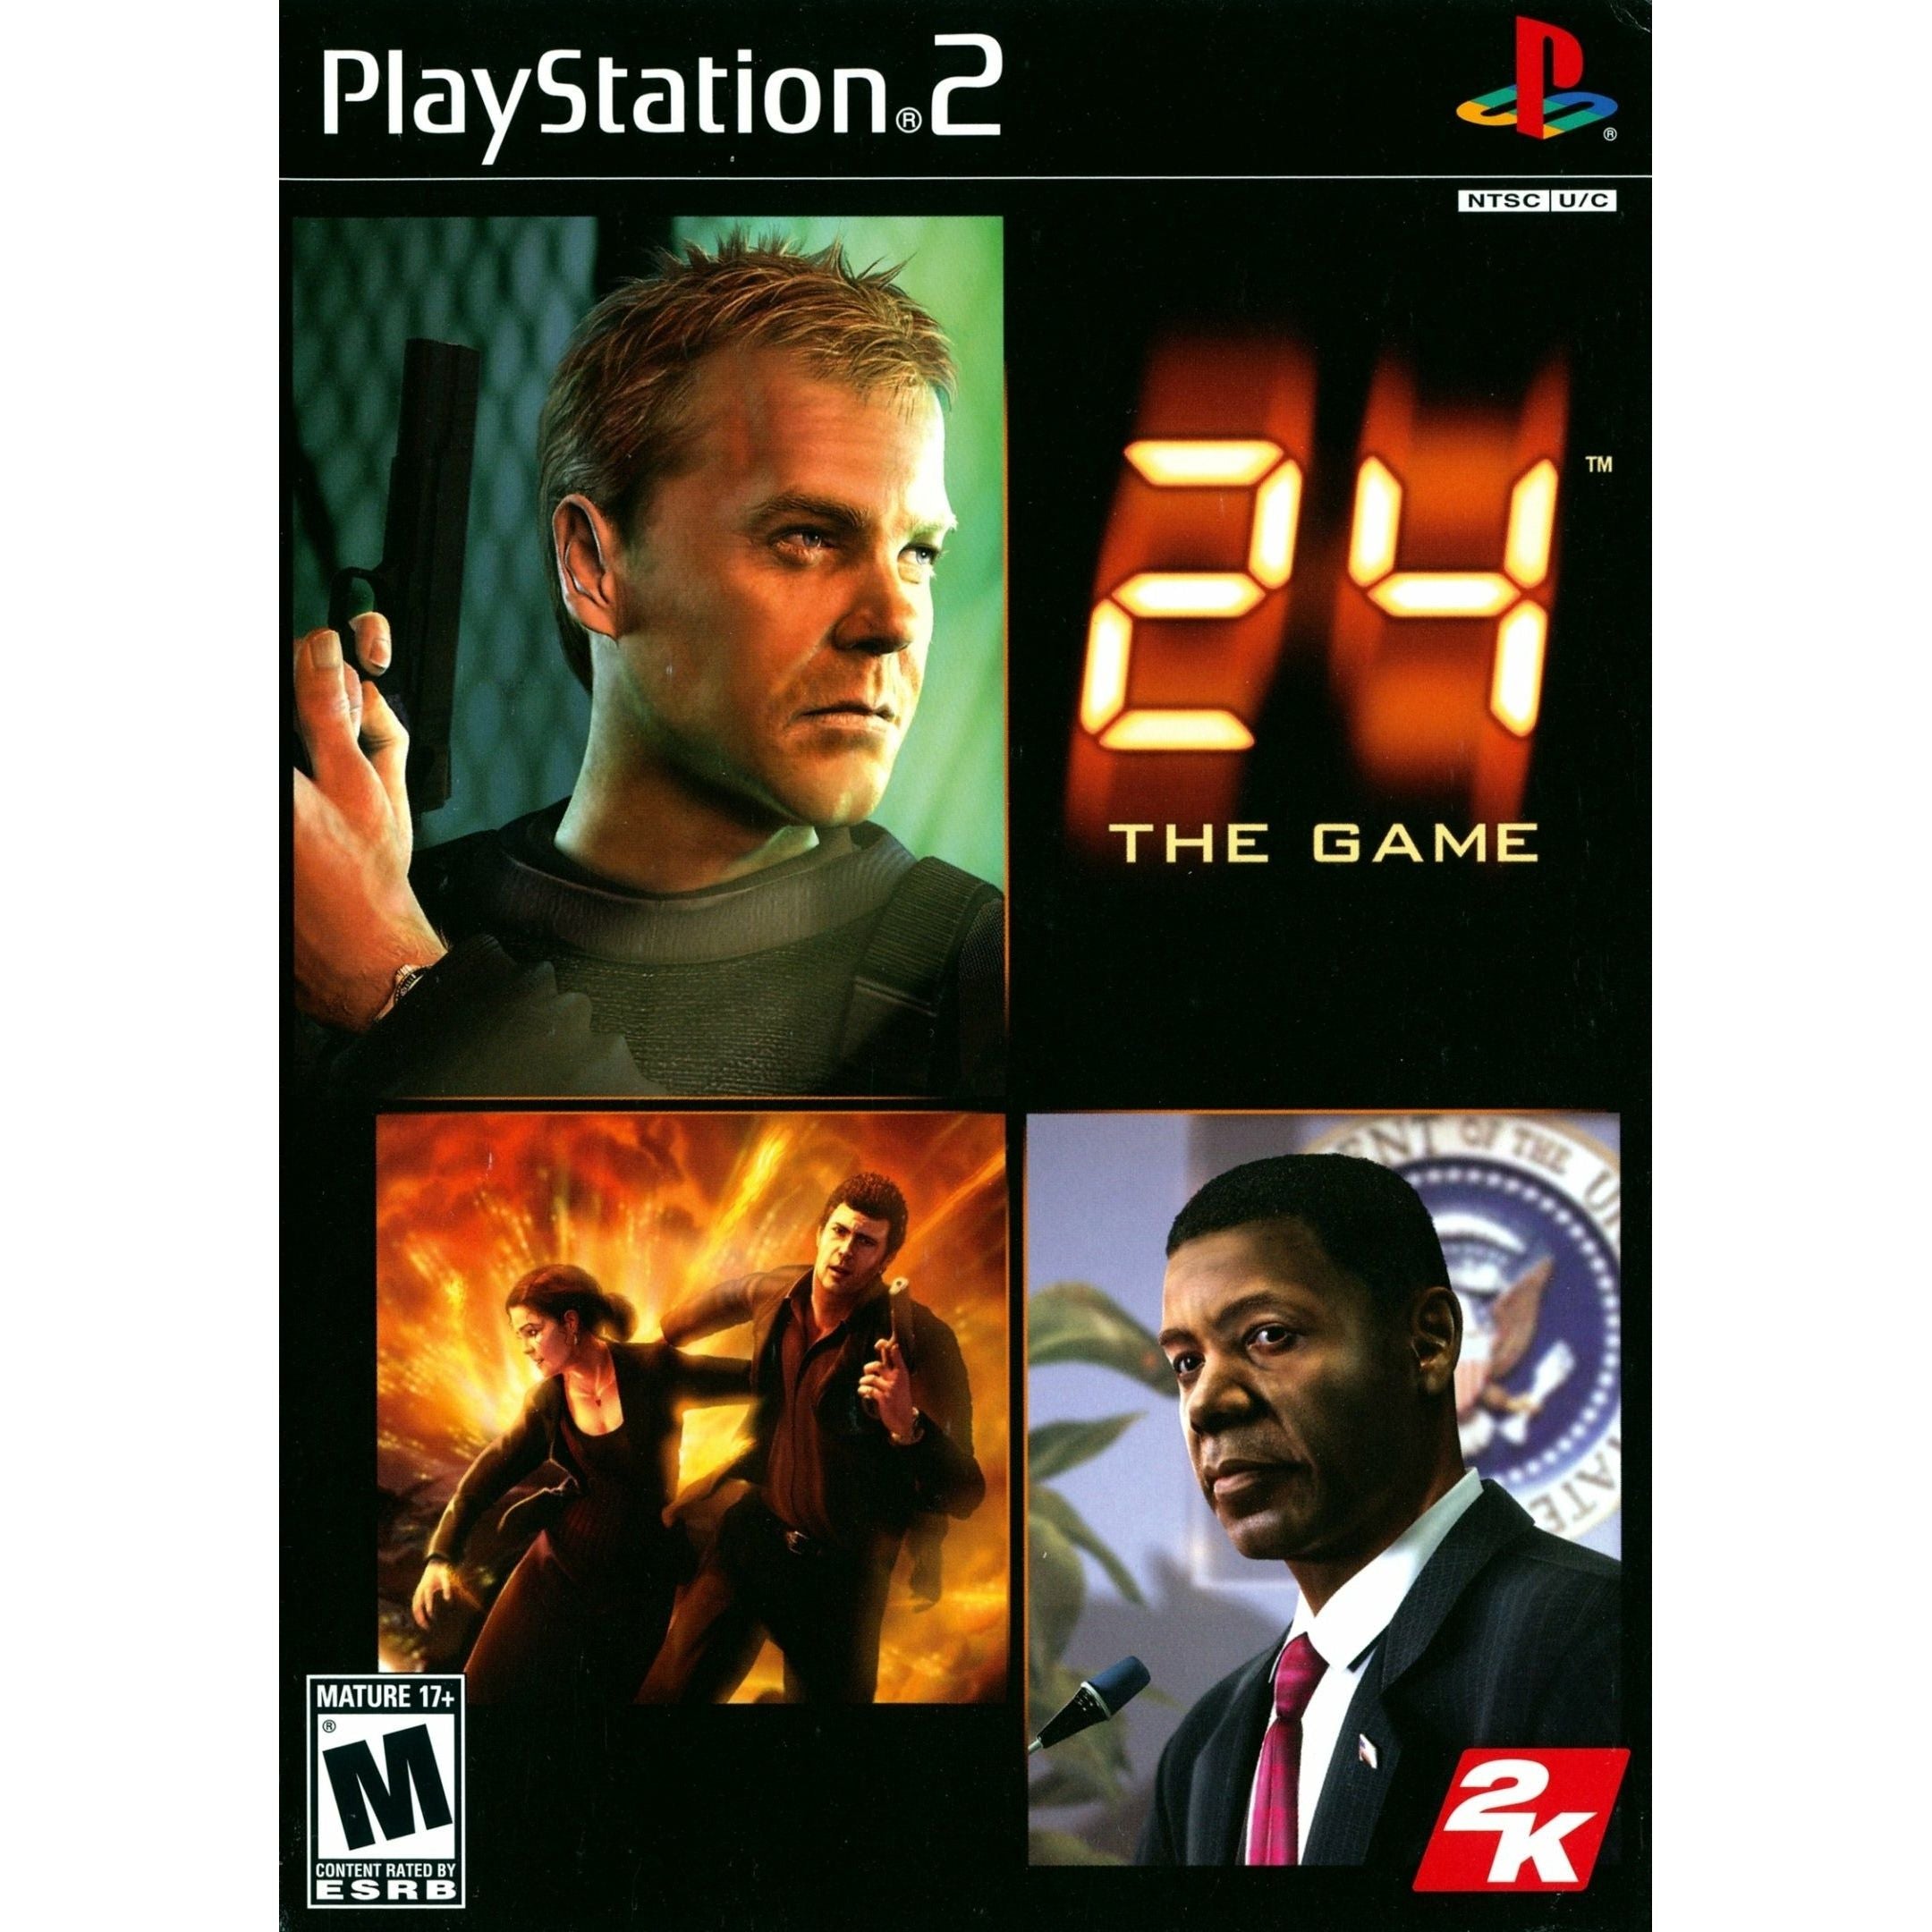 PS2 - 24 The Game